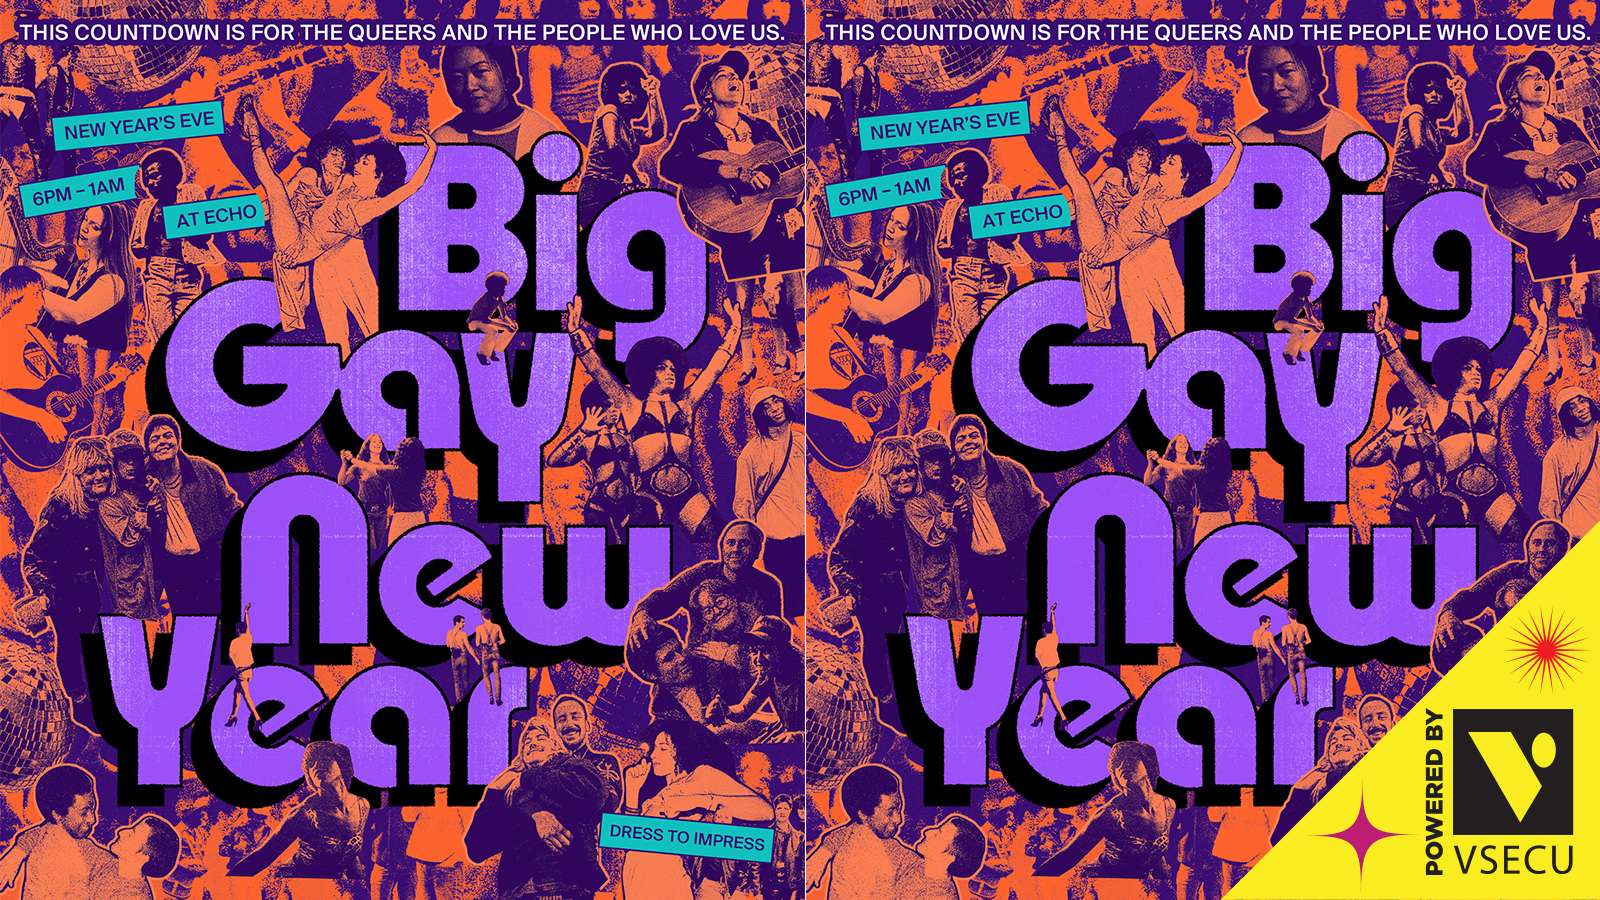 Graphic banner with text saying "big gay new year", "this countdown is for the queers and the people who love us", "New Year's Eve", "6pm-1am", "at echo", "dress to impress". Text saying "powered by vsecu" in bottom right corner. Background is orange collaged crowd of people dancing, "big gay new year" text is purple, other text is white, aqua, and black.